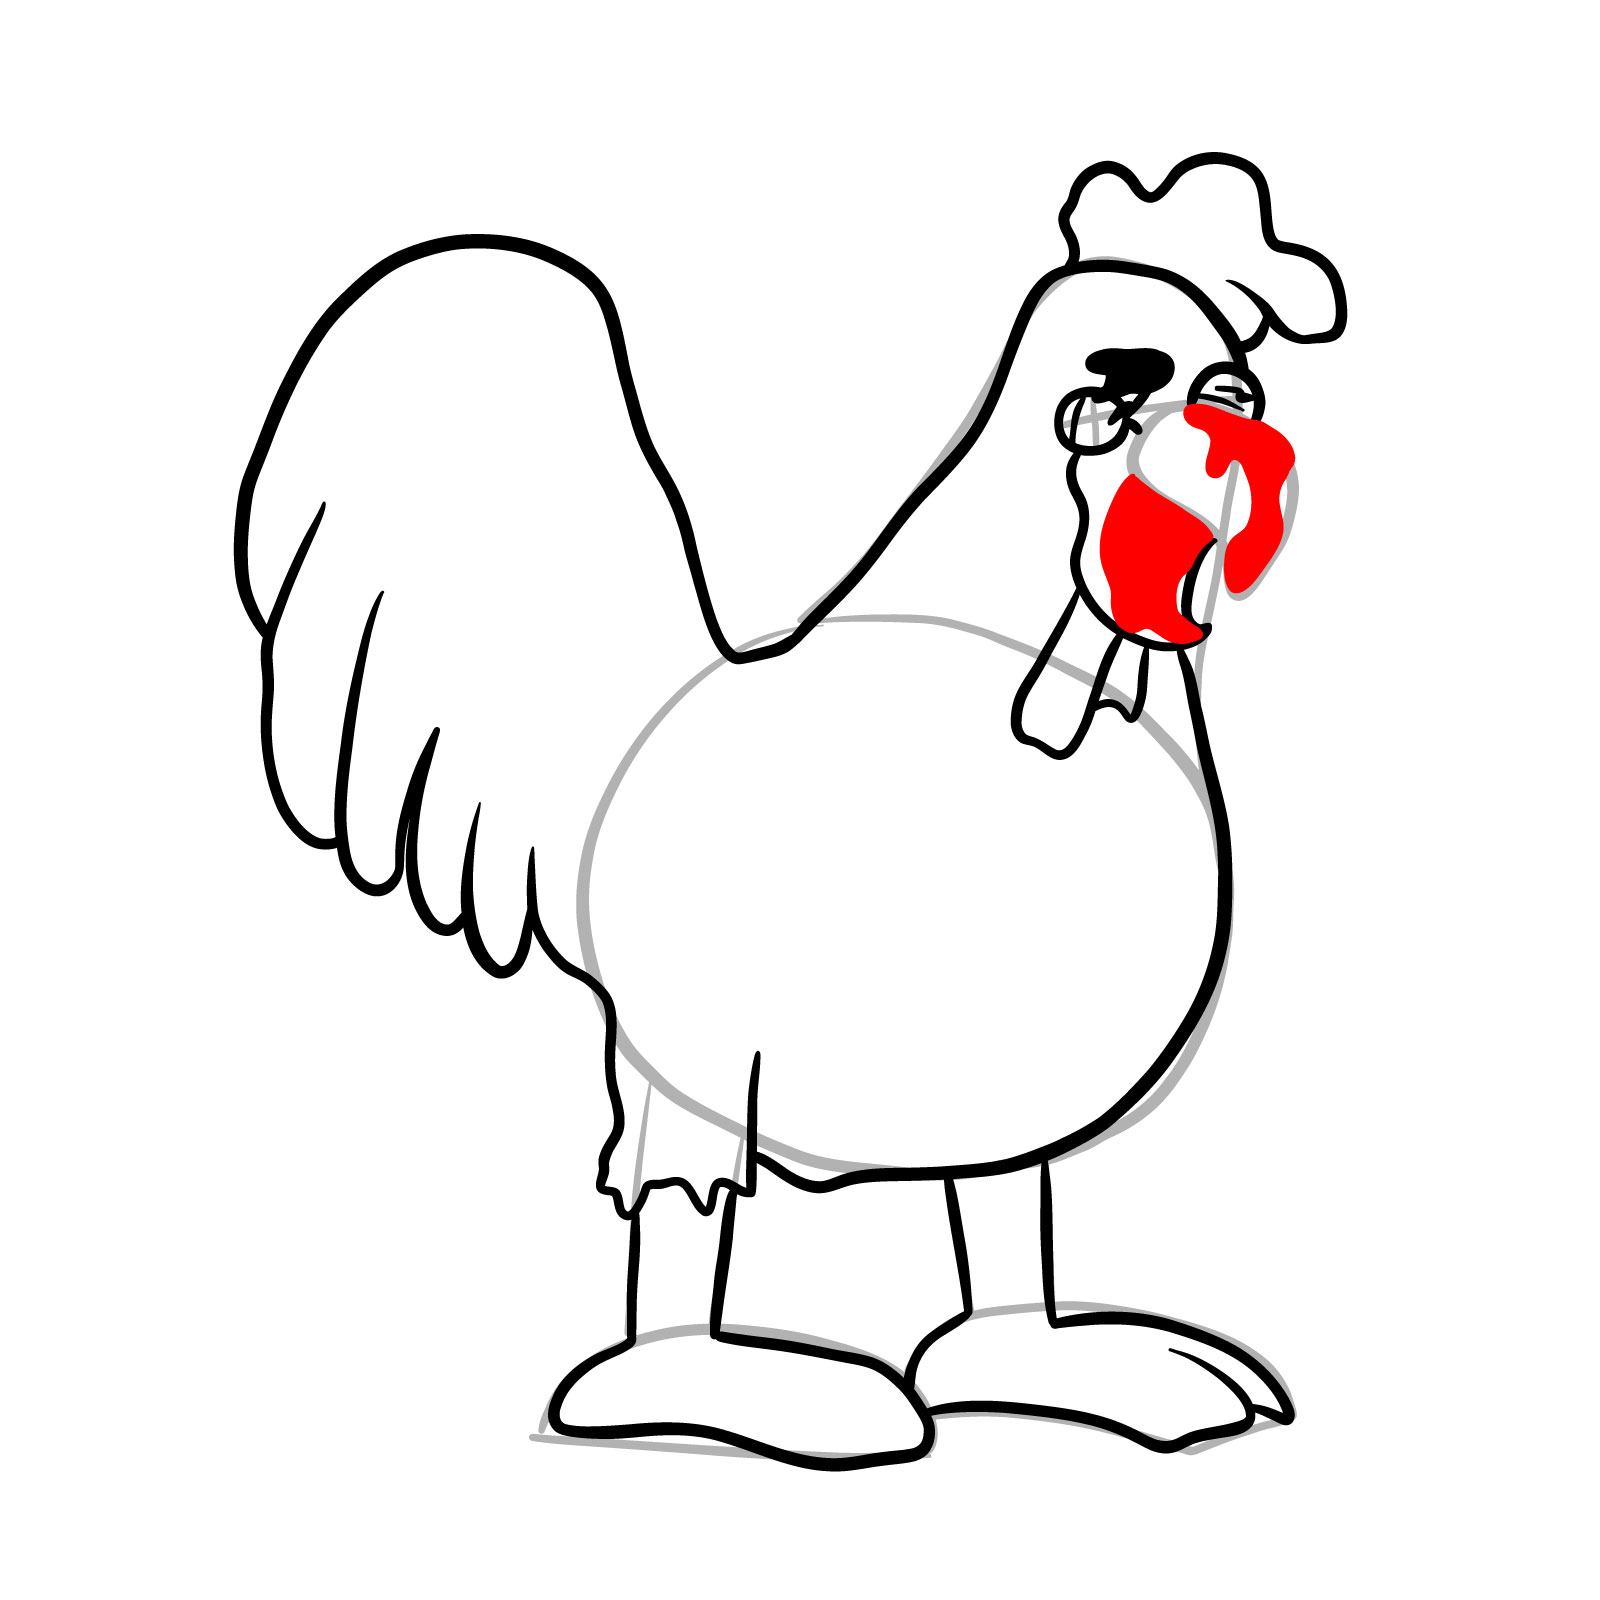 How to draw Corrupted Ernie the Chicken - step 17